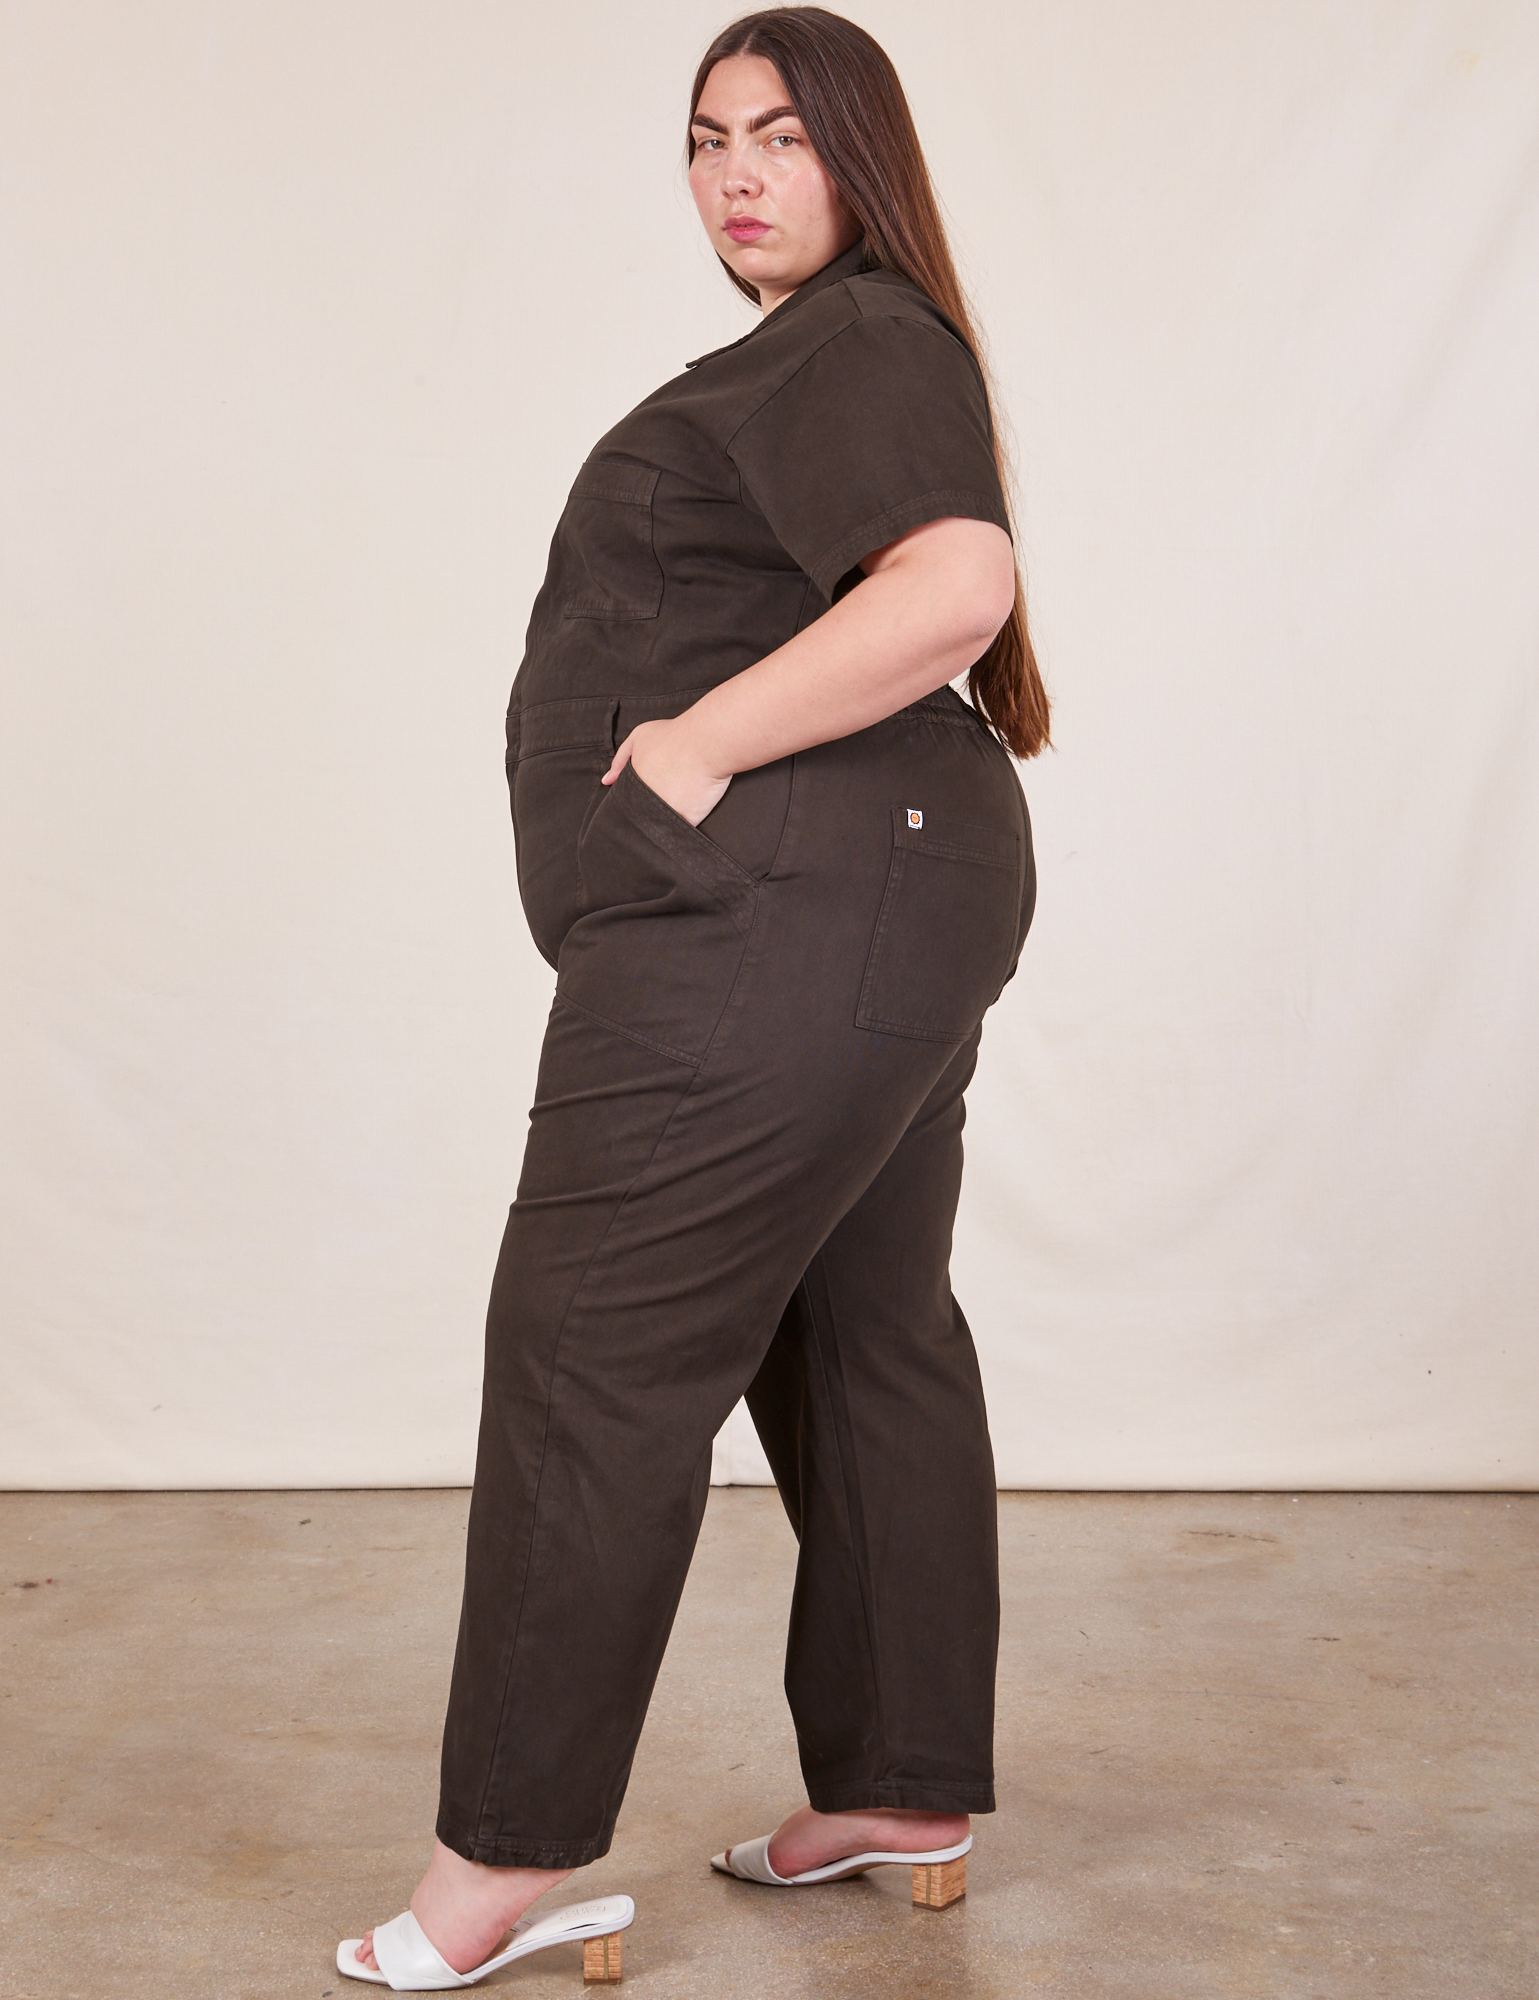 Side view of Short Sleeve Jumpsuit in Espresso Brown worn by Marielena